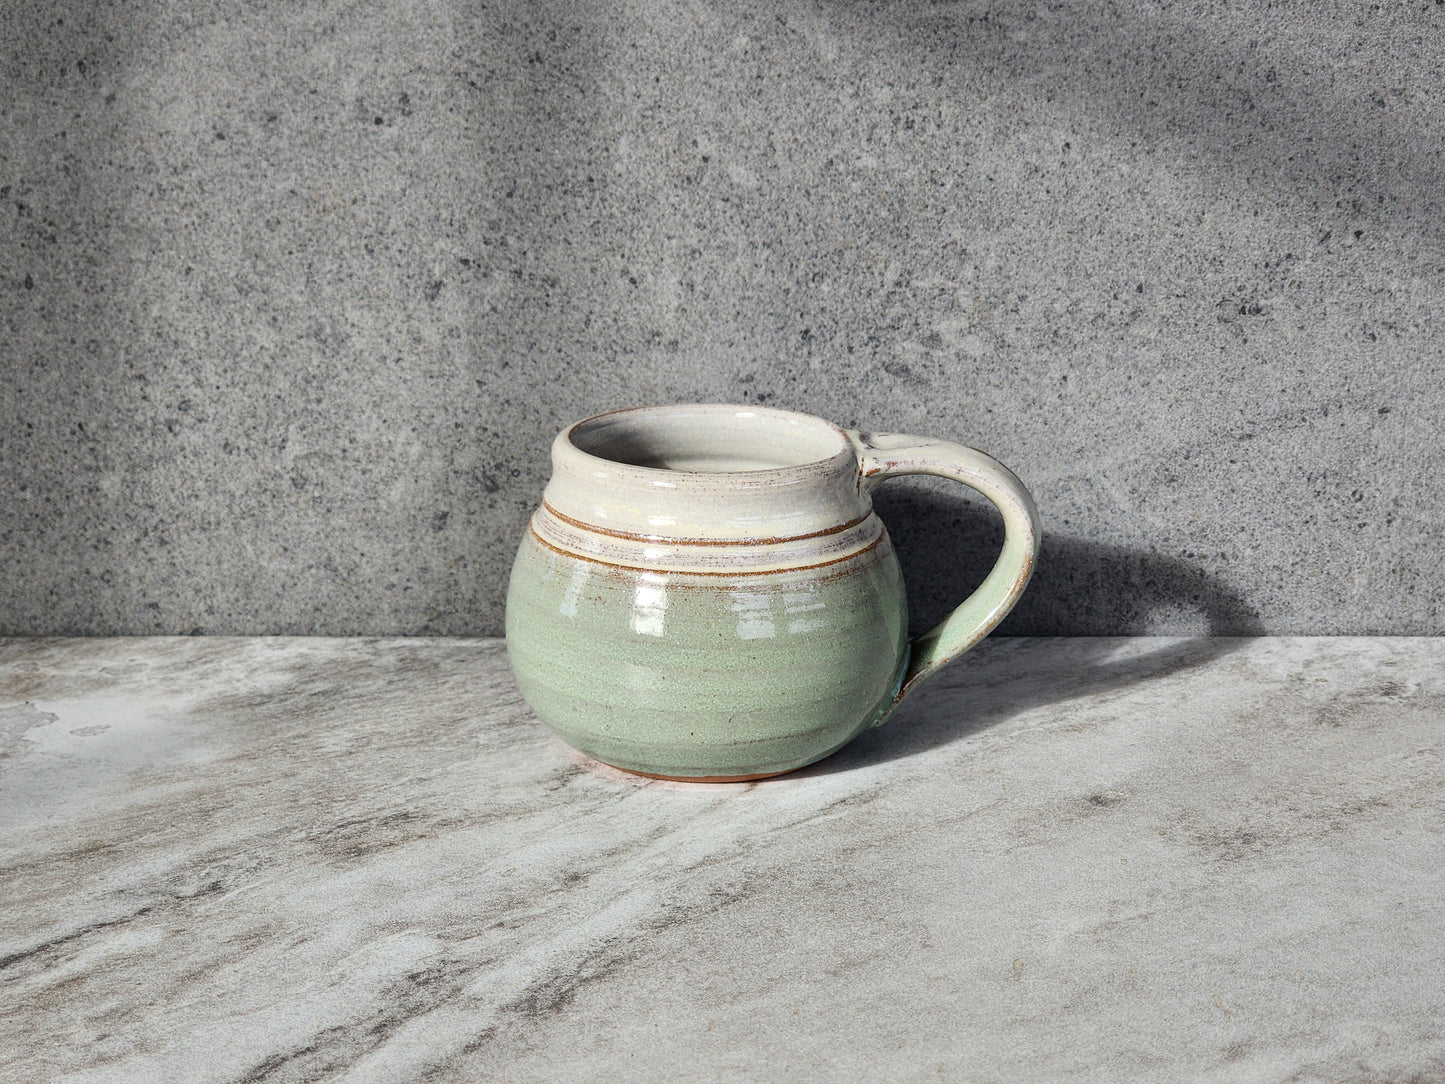 Light Green: Embrace the beauty of nature with the Light Green small mug by Clinton Pottery. Its soft, pastel hue evokes images of fresh spring leaves and blooming flowers, adding a touch of natural elegance to your beverage experience.